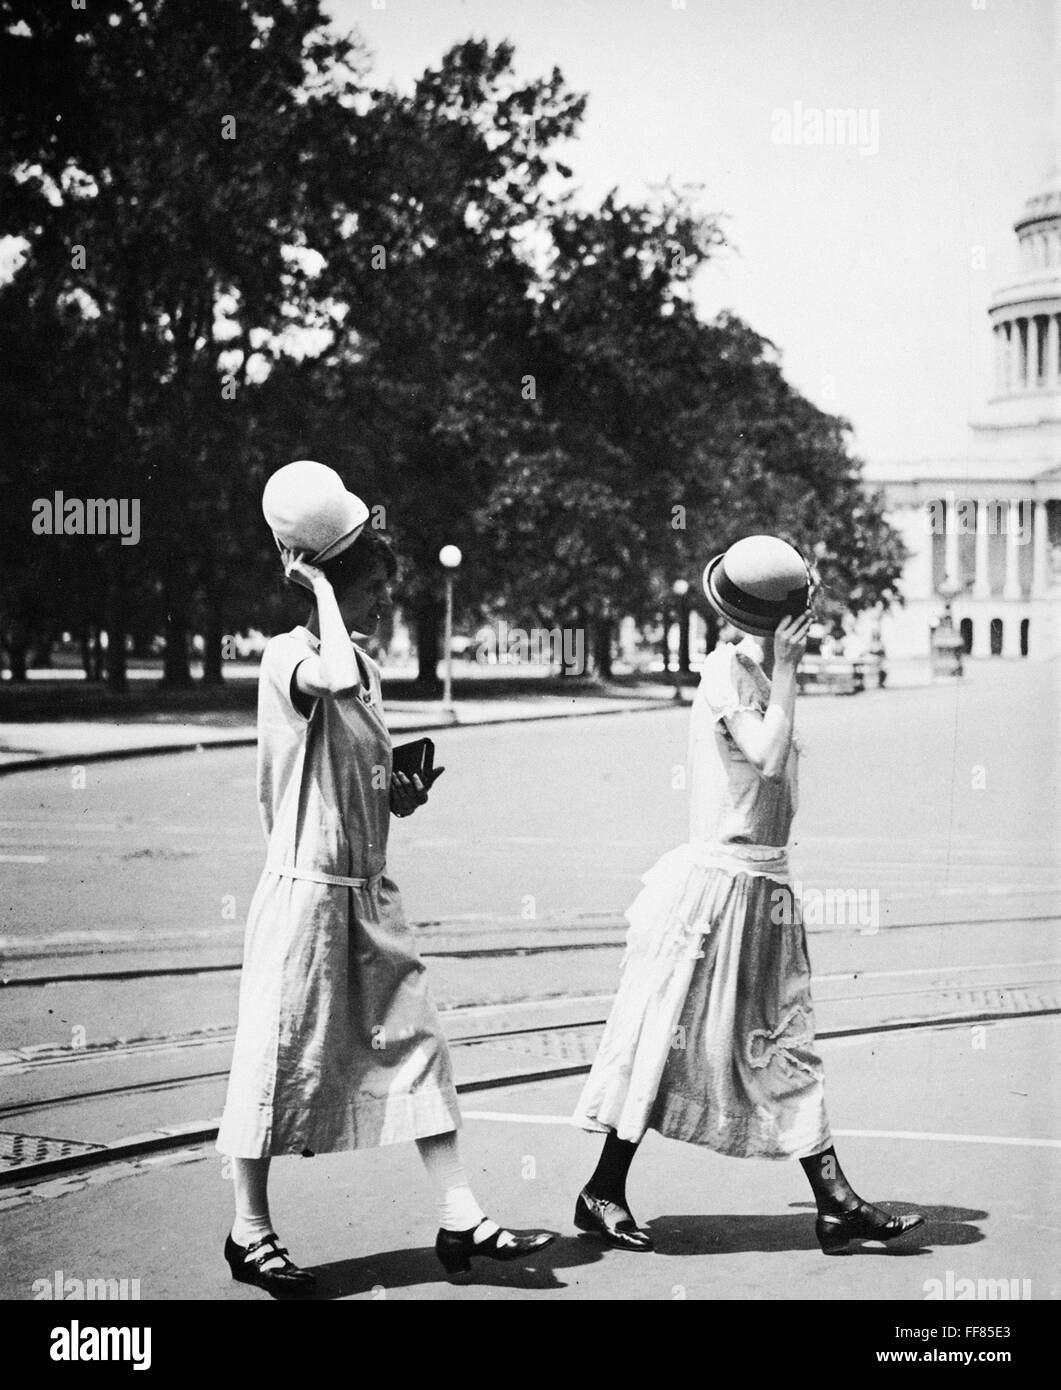 WOMEN'S FASHION, c1920. /nTwo young campaigners for equal rights tipping their hats in Washington, D.C. Stock Photo